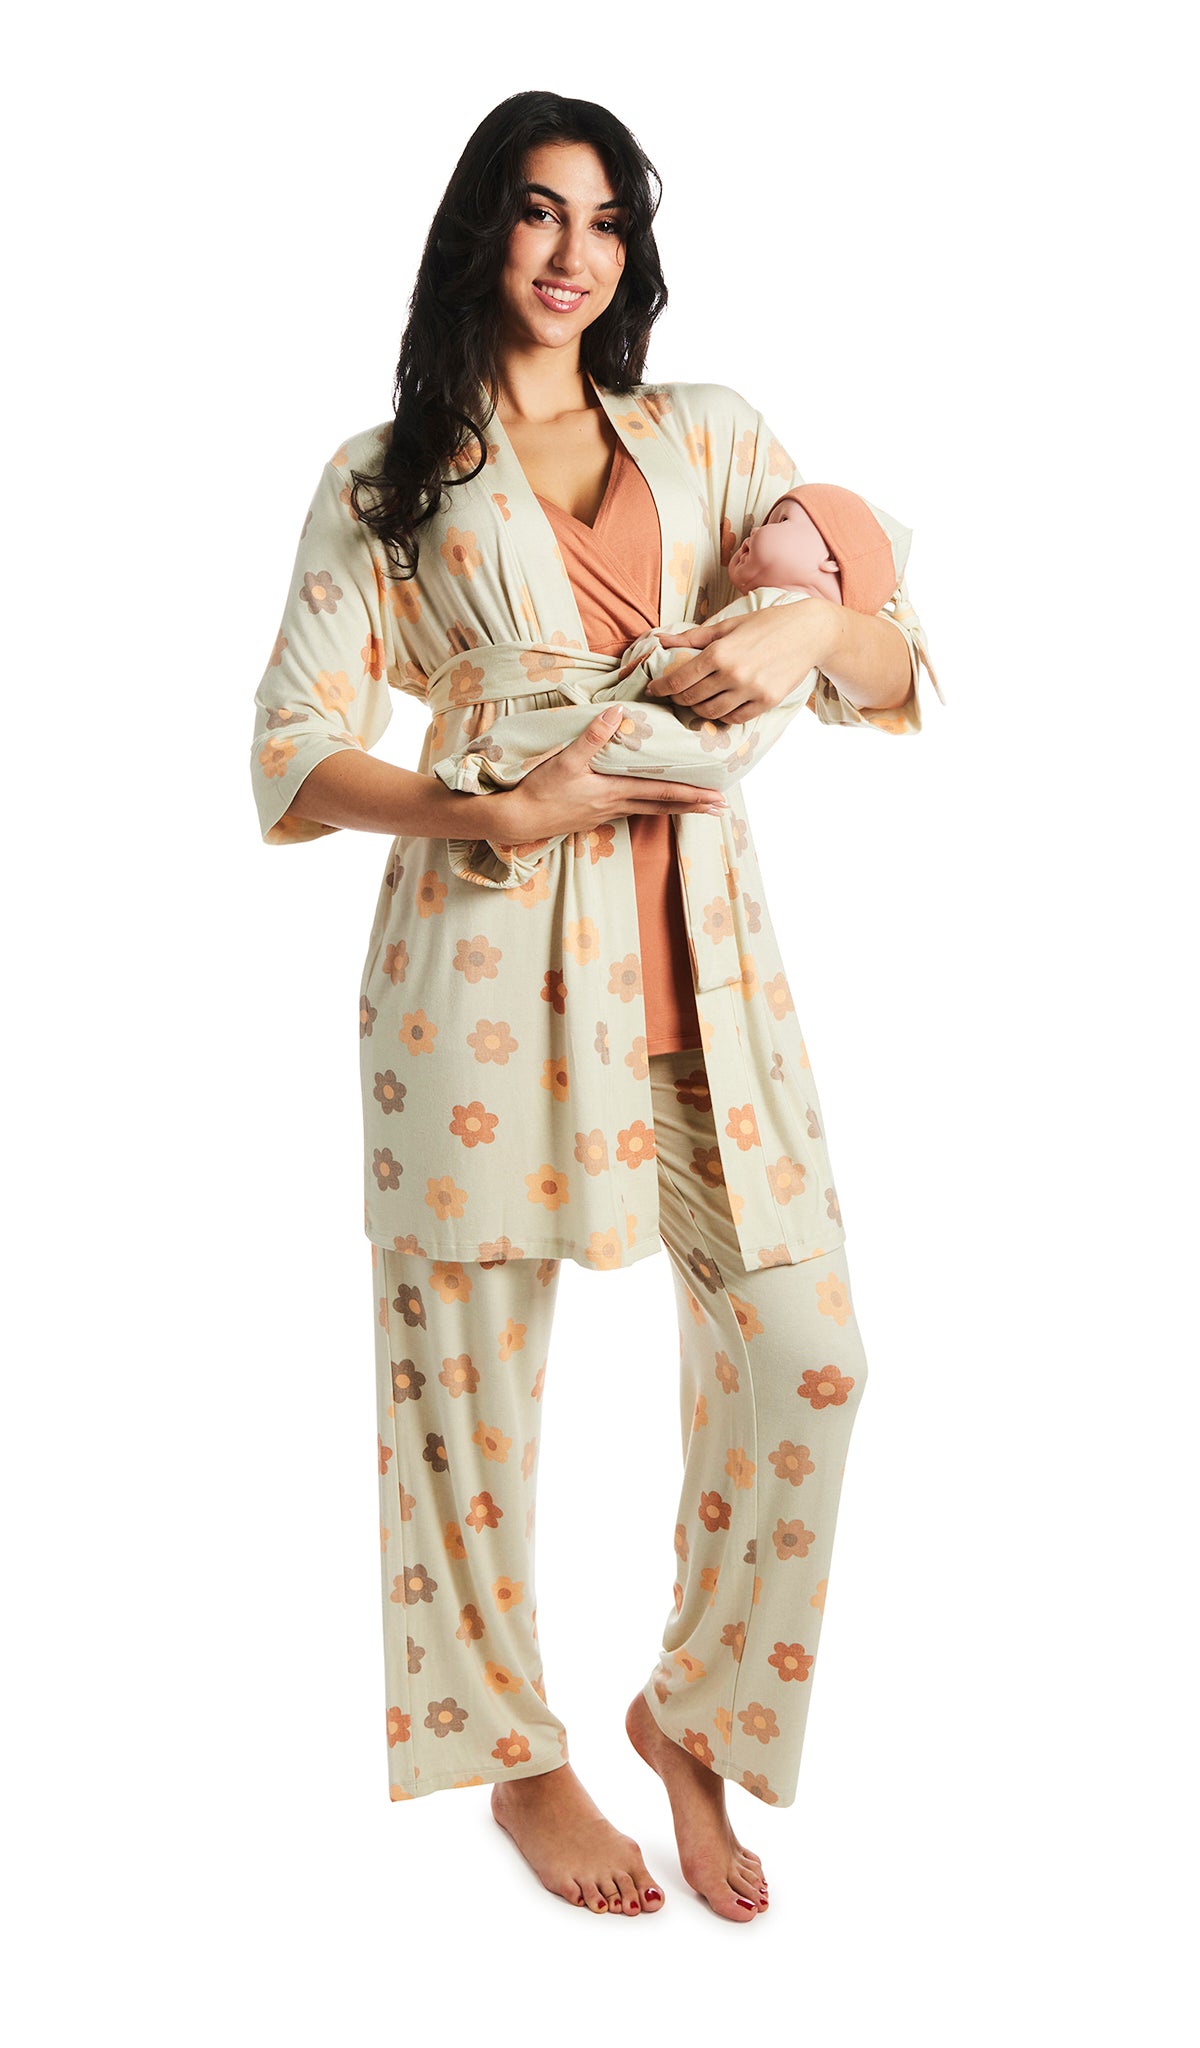 Daisies Analise 5-Piece Set. Woman wearing 3/4 sleeve robe, tank top and pant while holding a baby wearing baby gown and knotted baby hat.